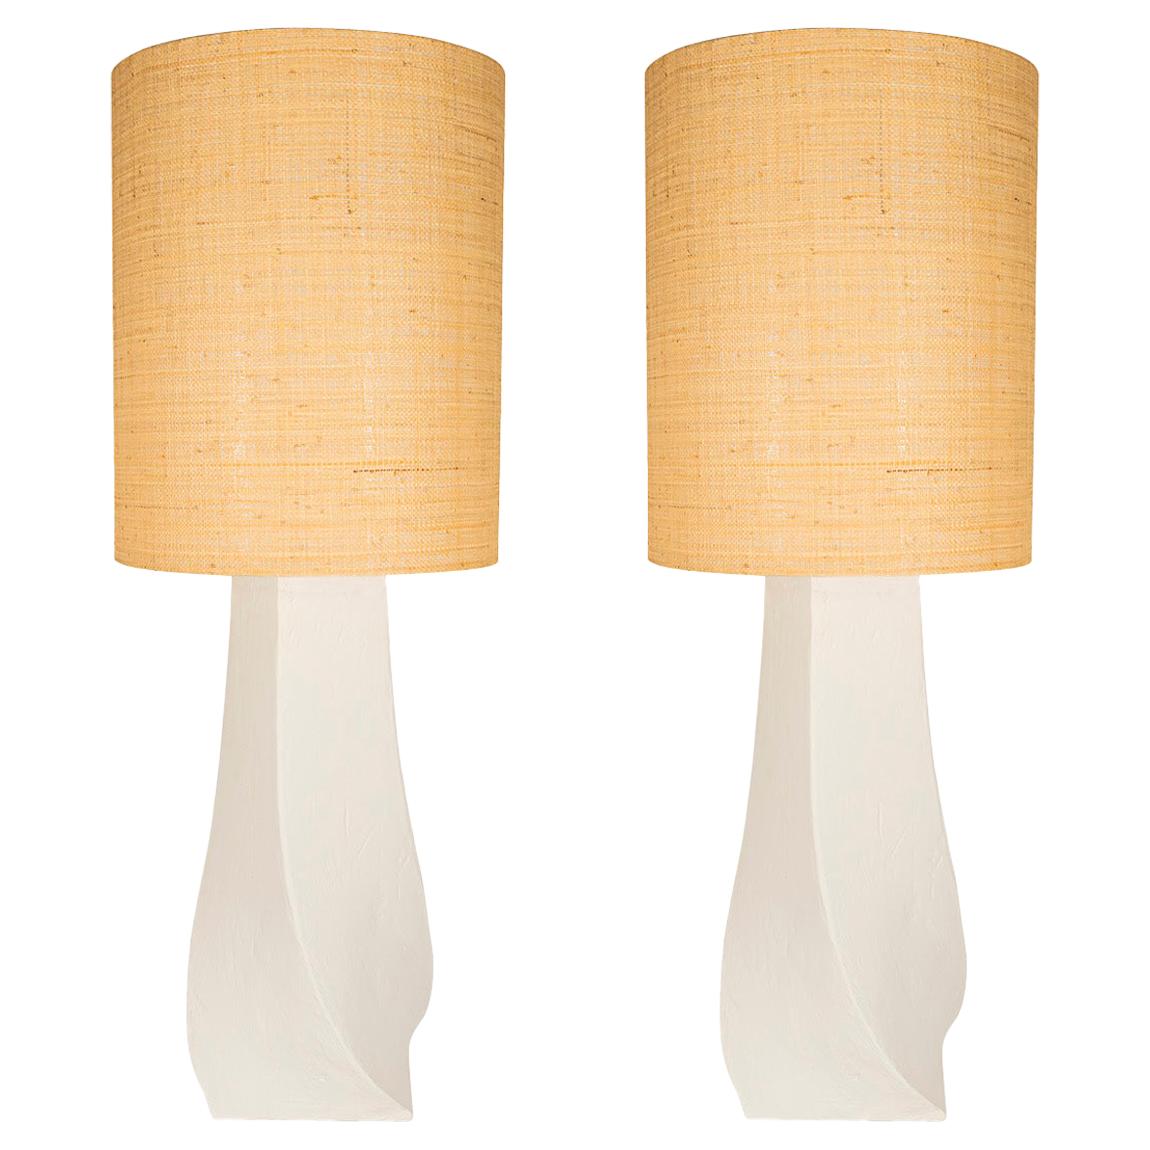 Pair of Table Lamps, Plaster and Rattan, France, circa 1970